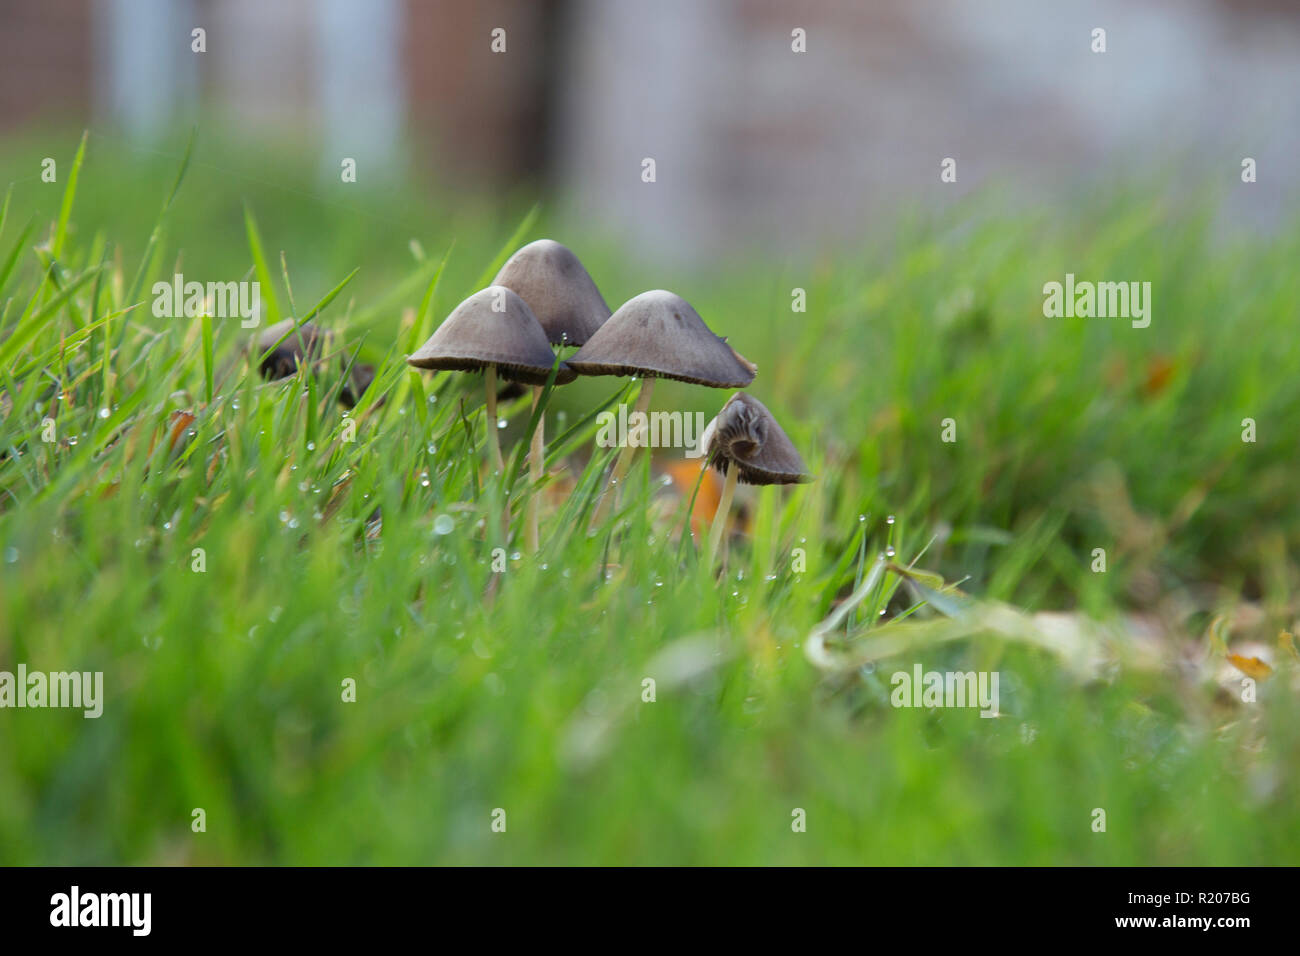 Close up of a group of mushrooms growing in a lawn from an eye level viewpoint Stock Photo